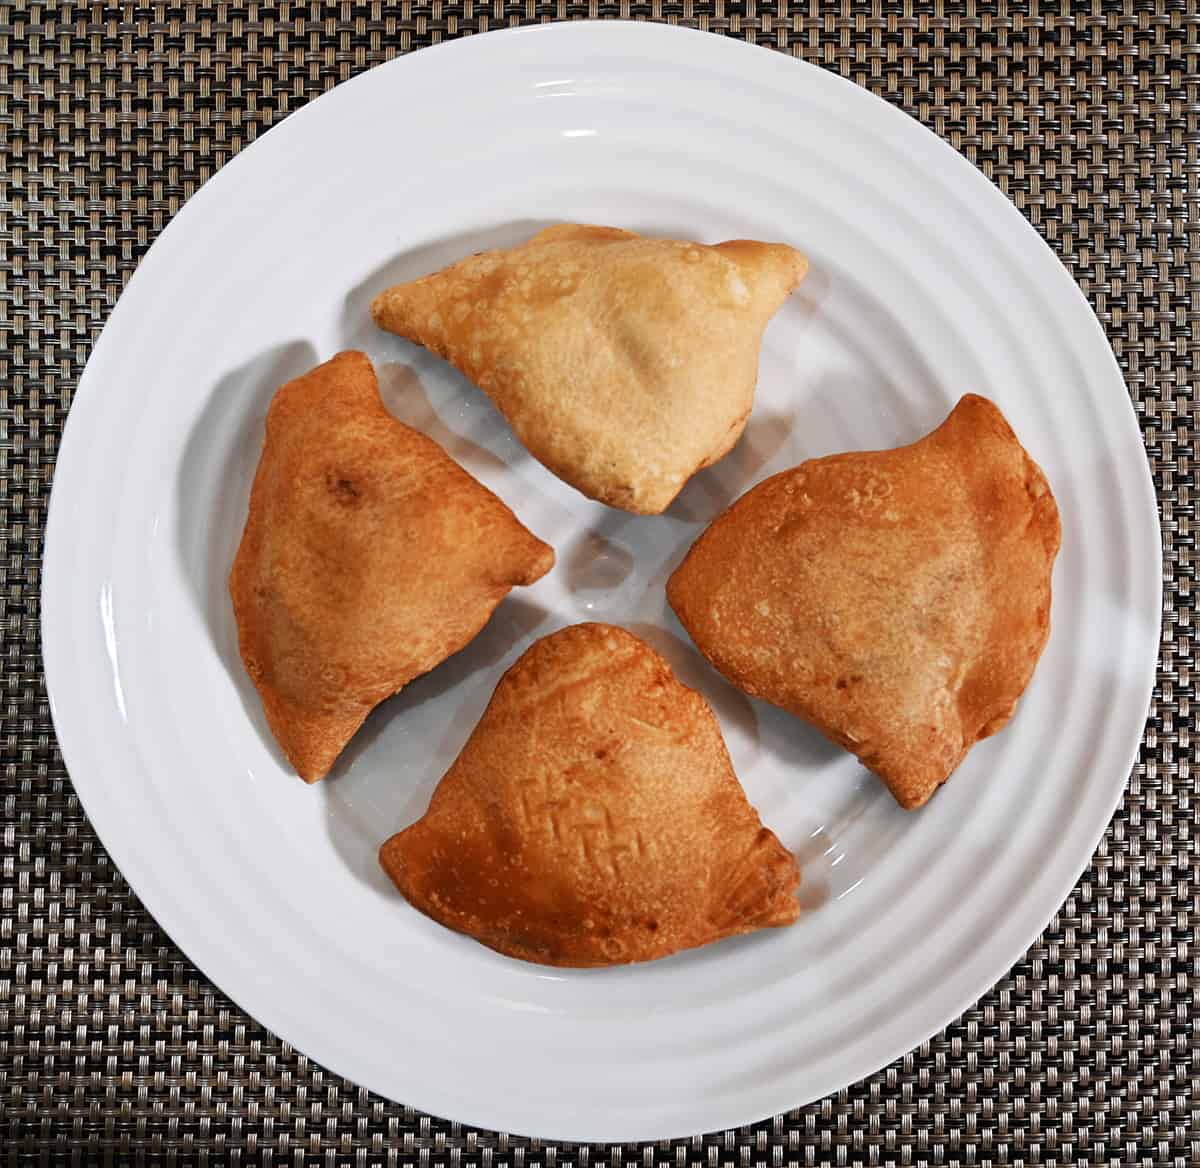 Top down image of four baked samosas served on a white plate.